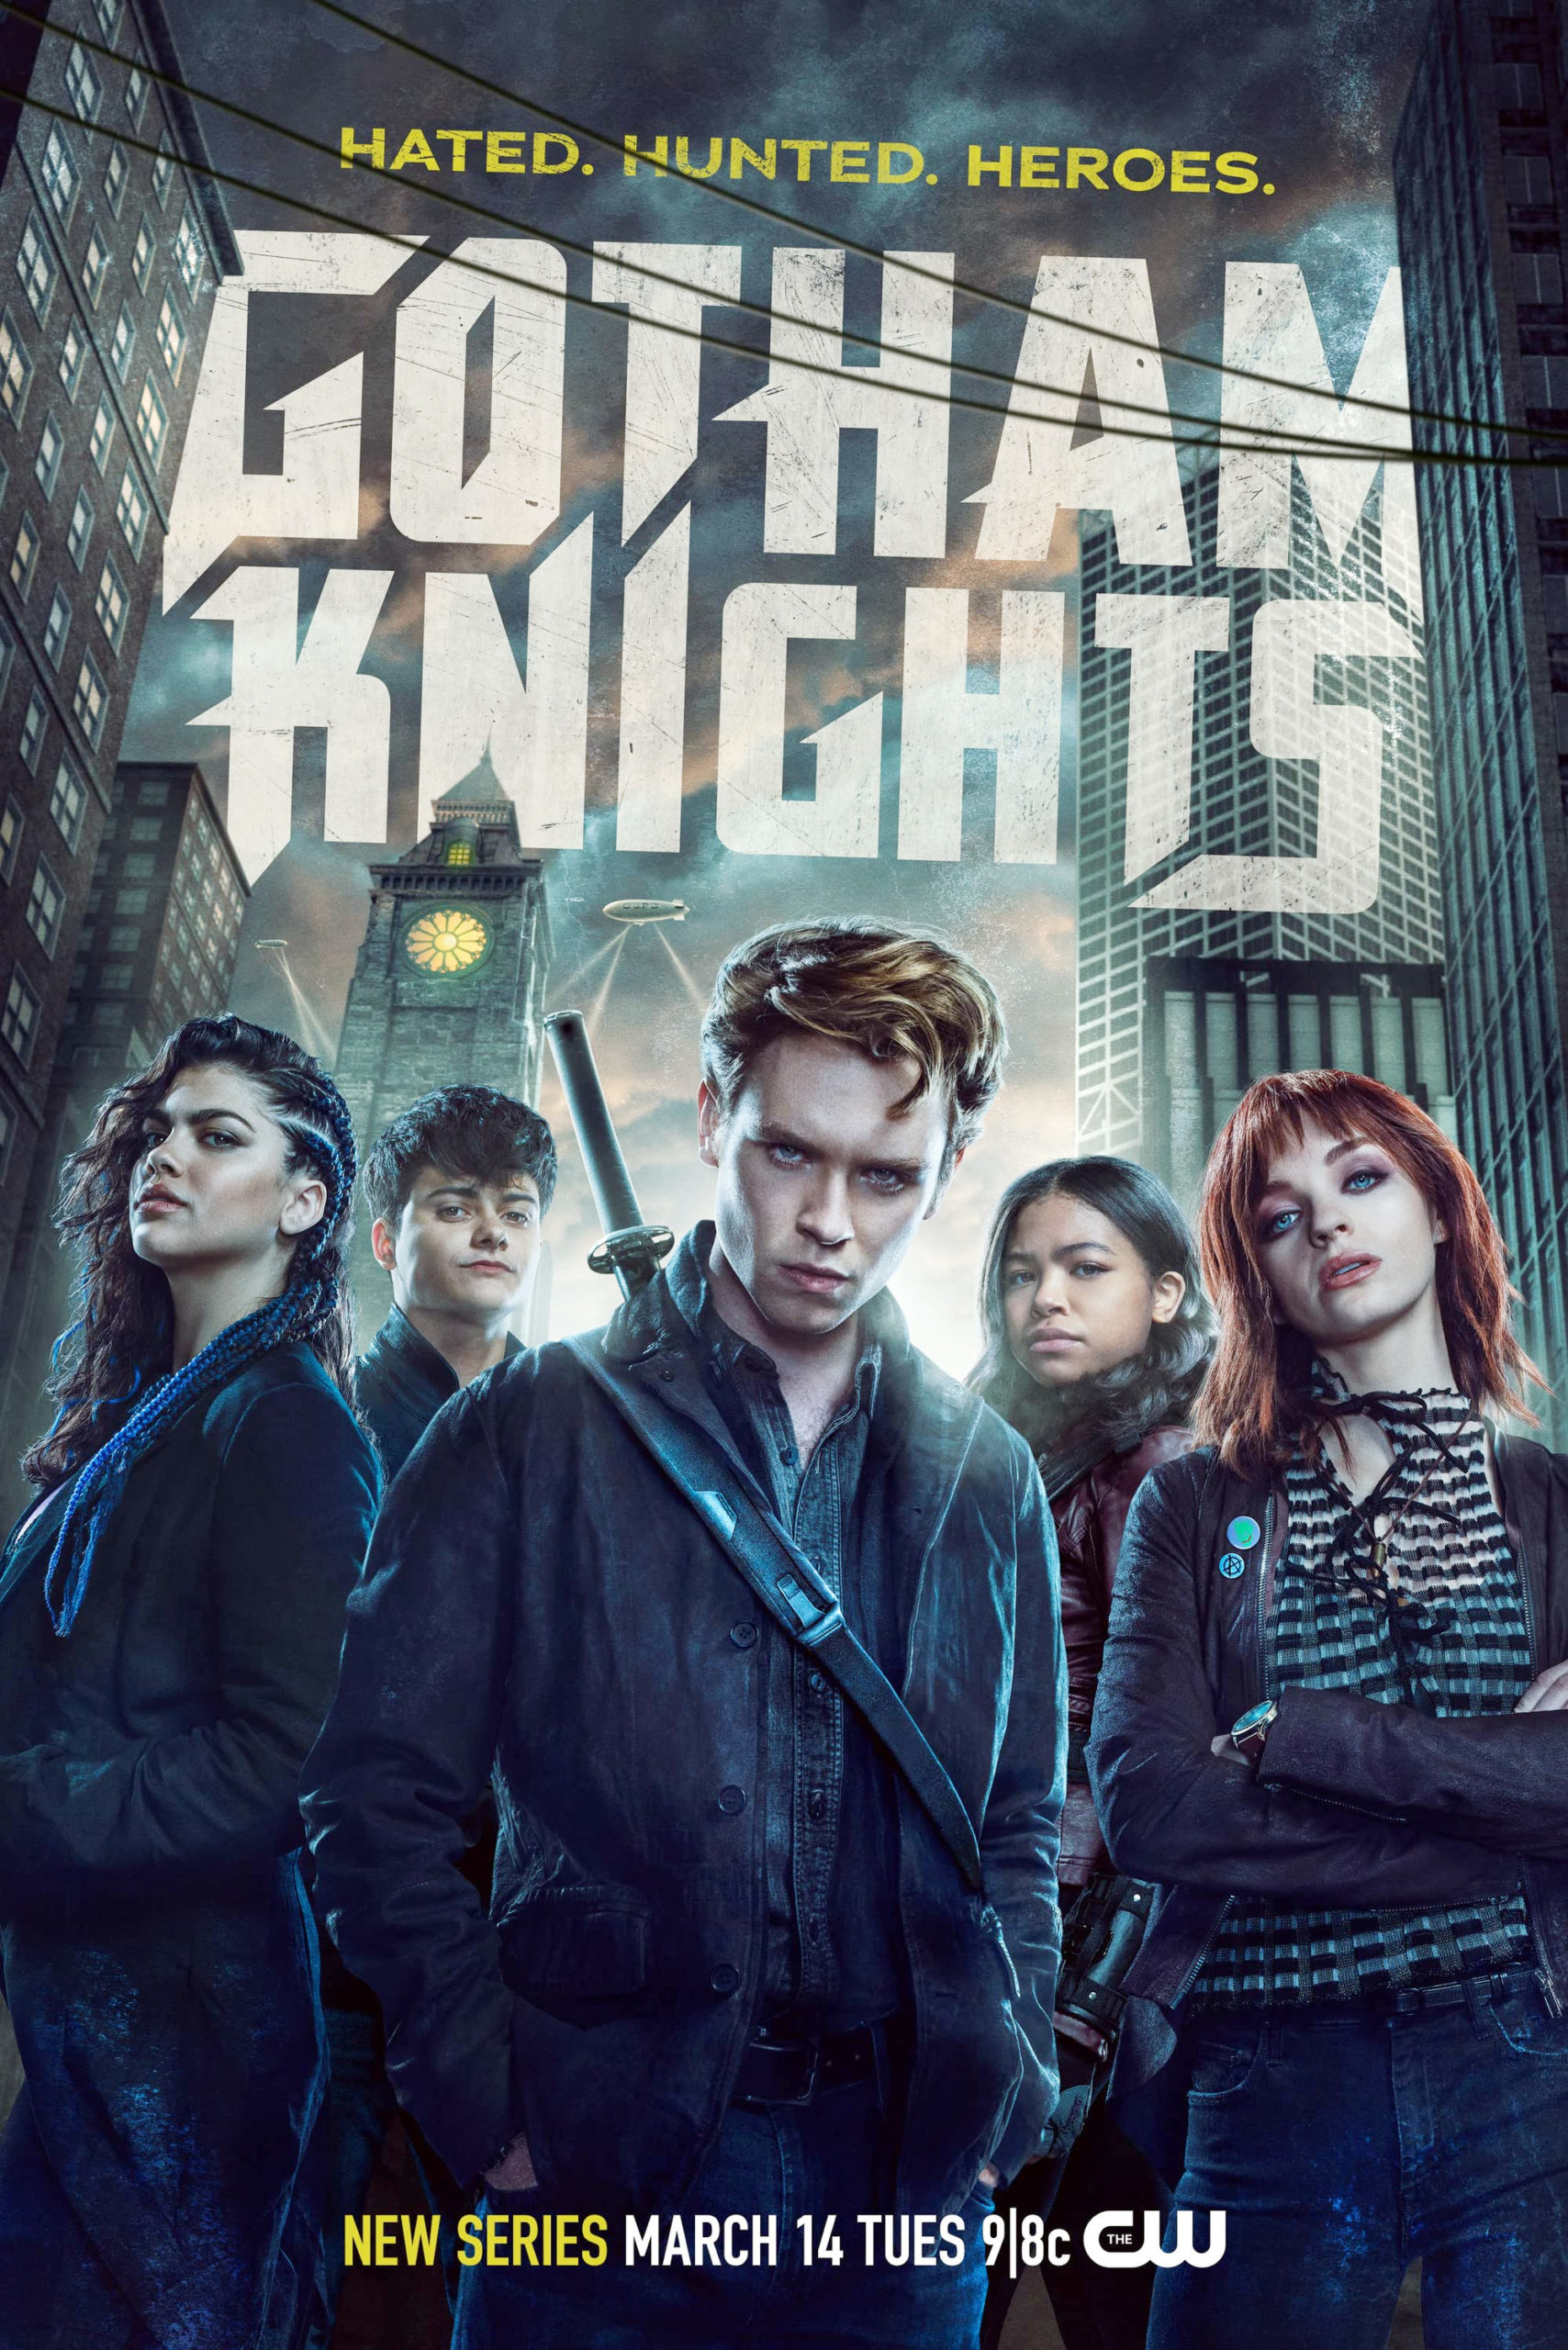 Who Stars In the New 'Gotham Knights' TV Series on The CW? Meet the Cast  Here!, Gotham Knights, Television, The CW